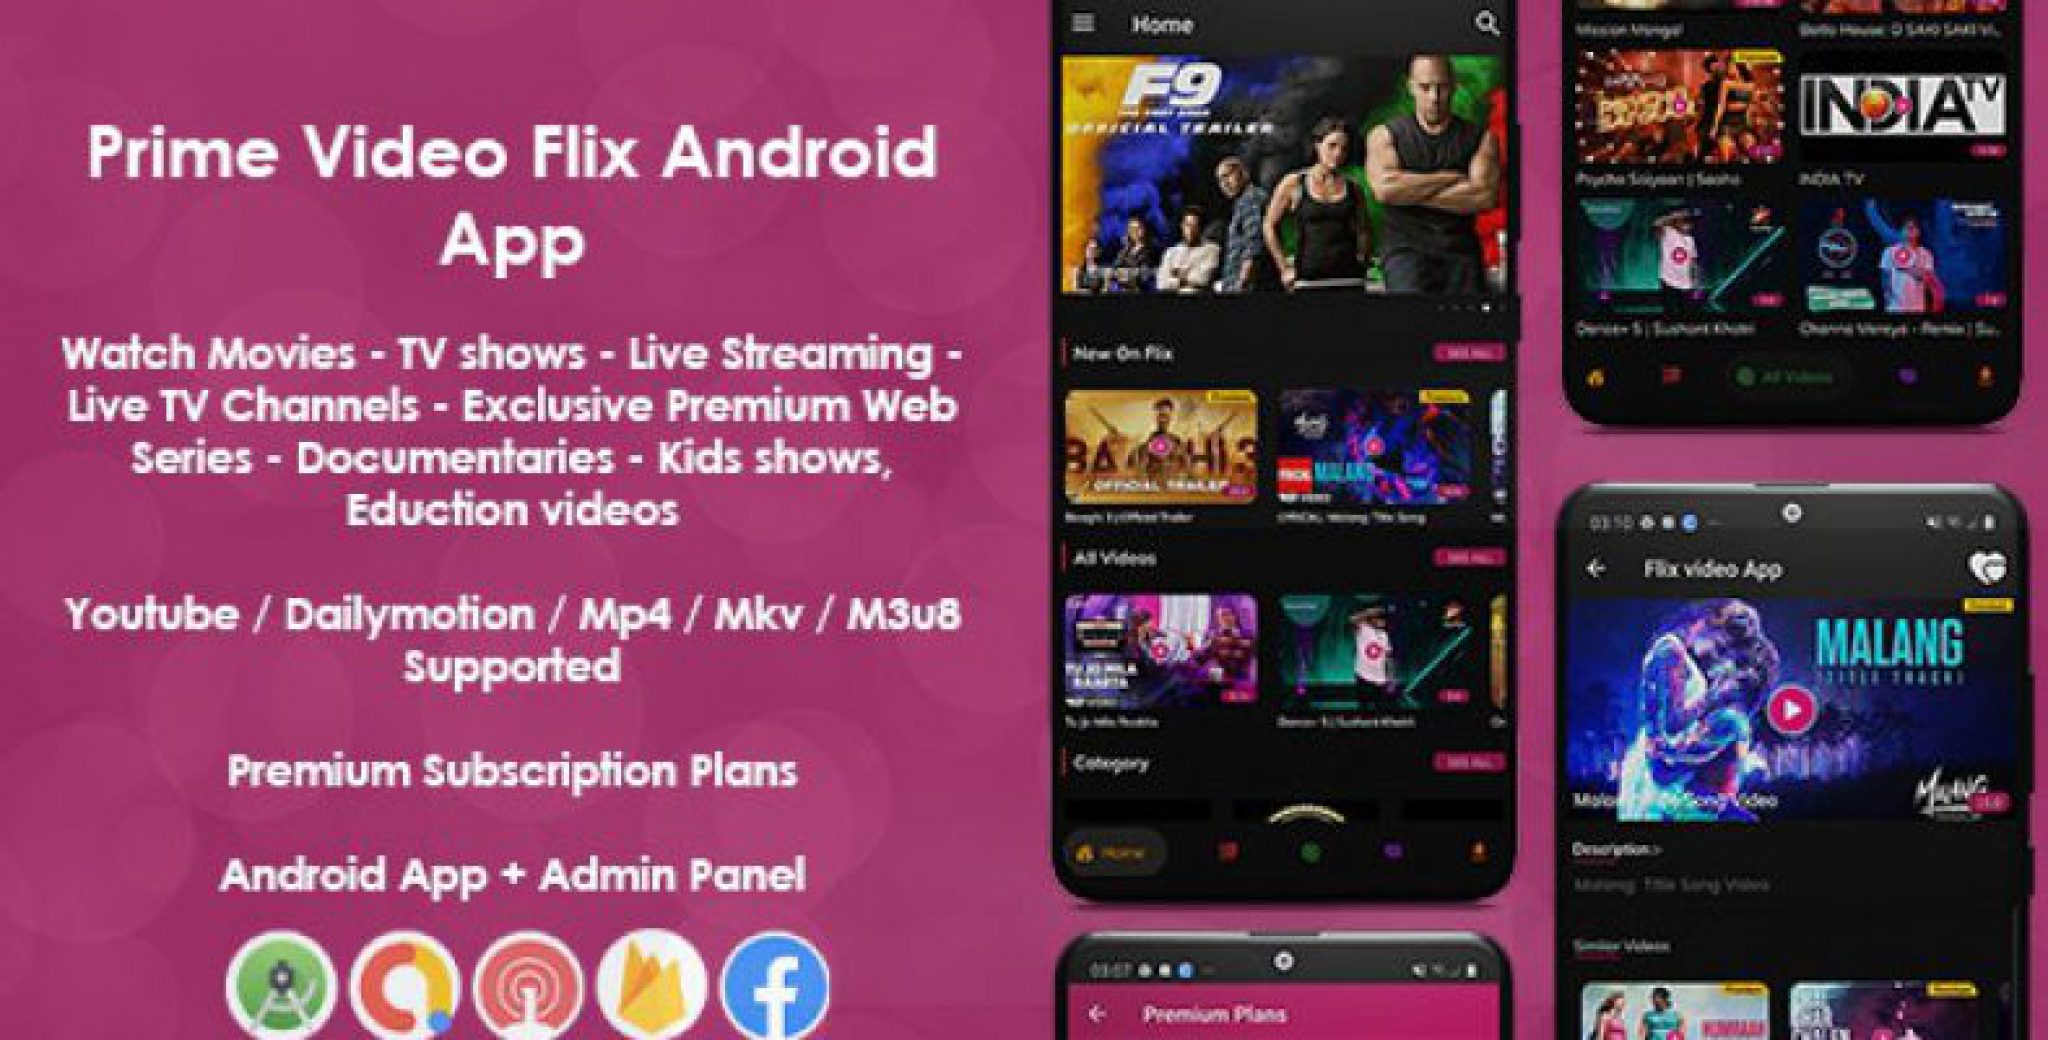 Prime Video Flix App: Movies - Shows - Live Streaming - TV - Web Series